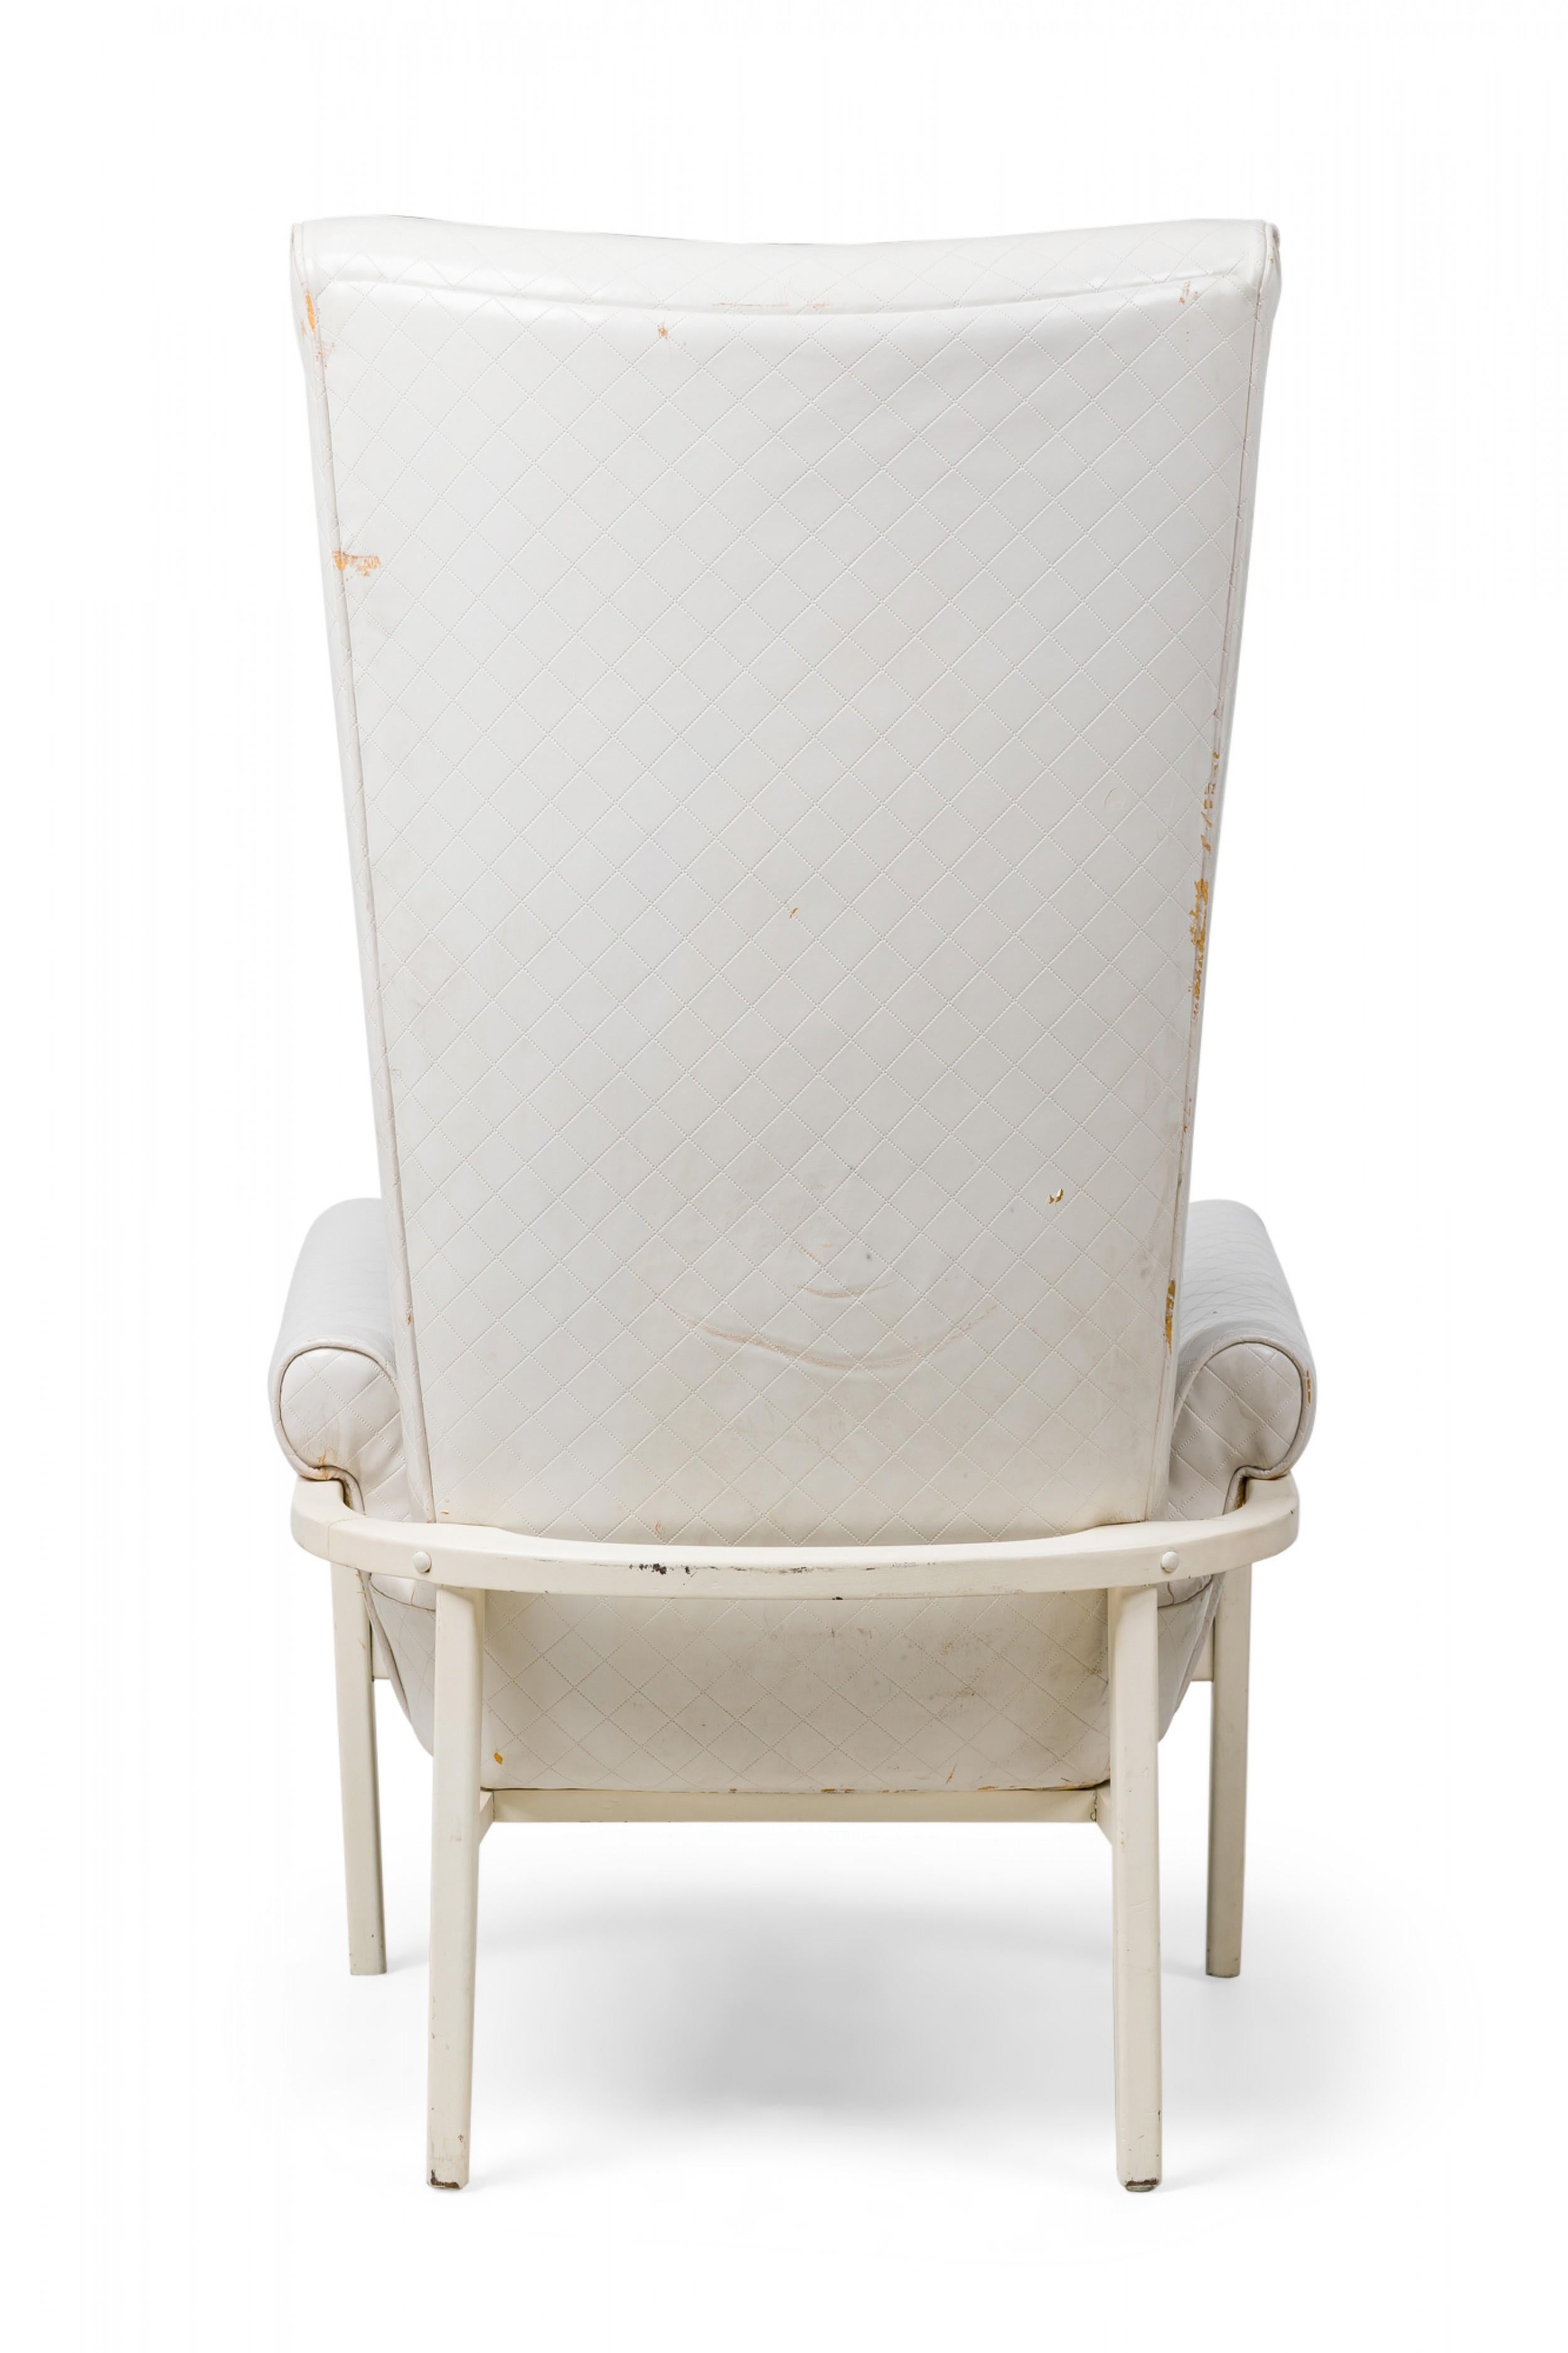 20th Century James Mont American High Back, Button Tufted White Lacquered Lounge/Armchair For Sale